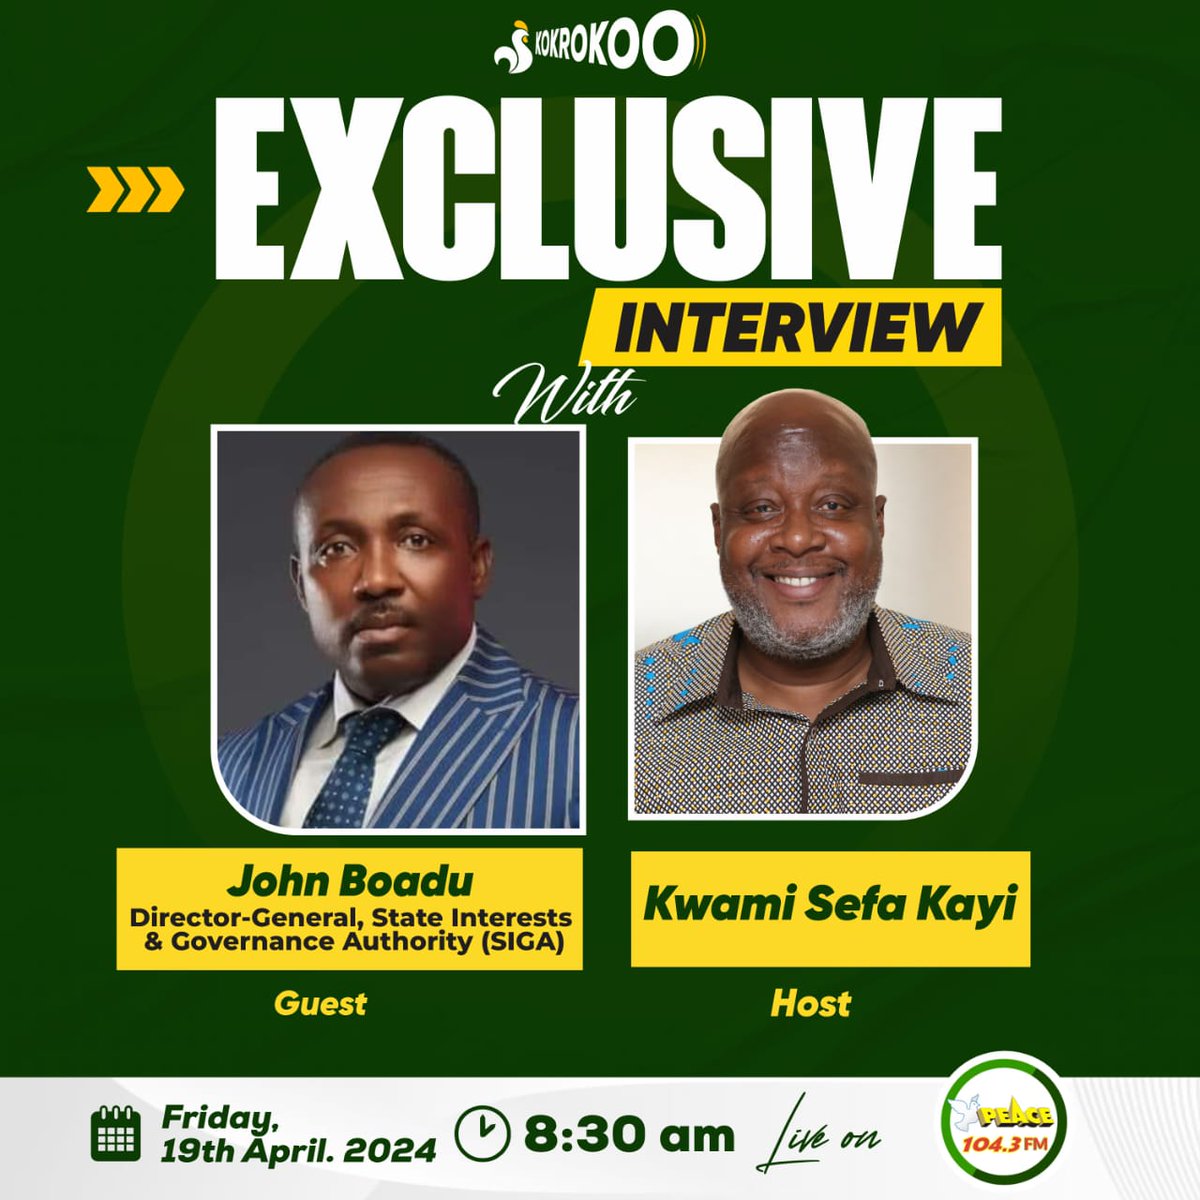 Join our Director-General, Mr. John Boadu, tomorrow morning at 8:30am on Peace fm as he discusses the upcoming Policy Forum and our Specified Entities.